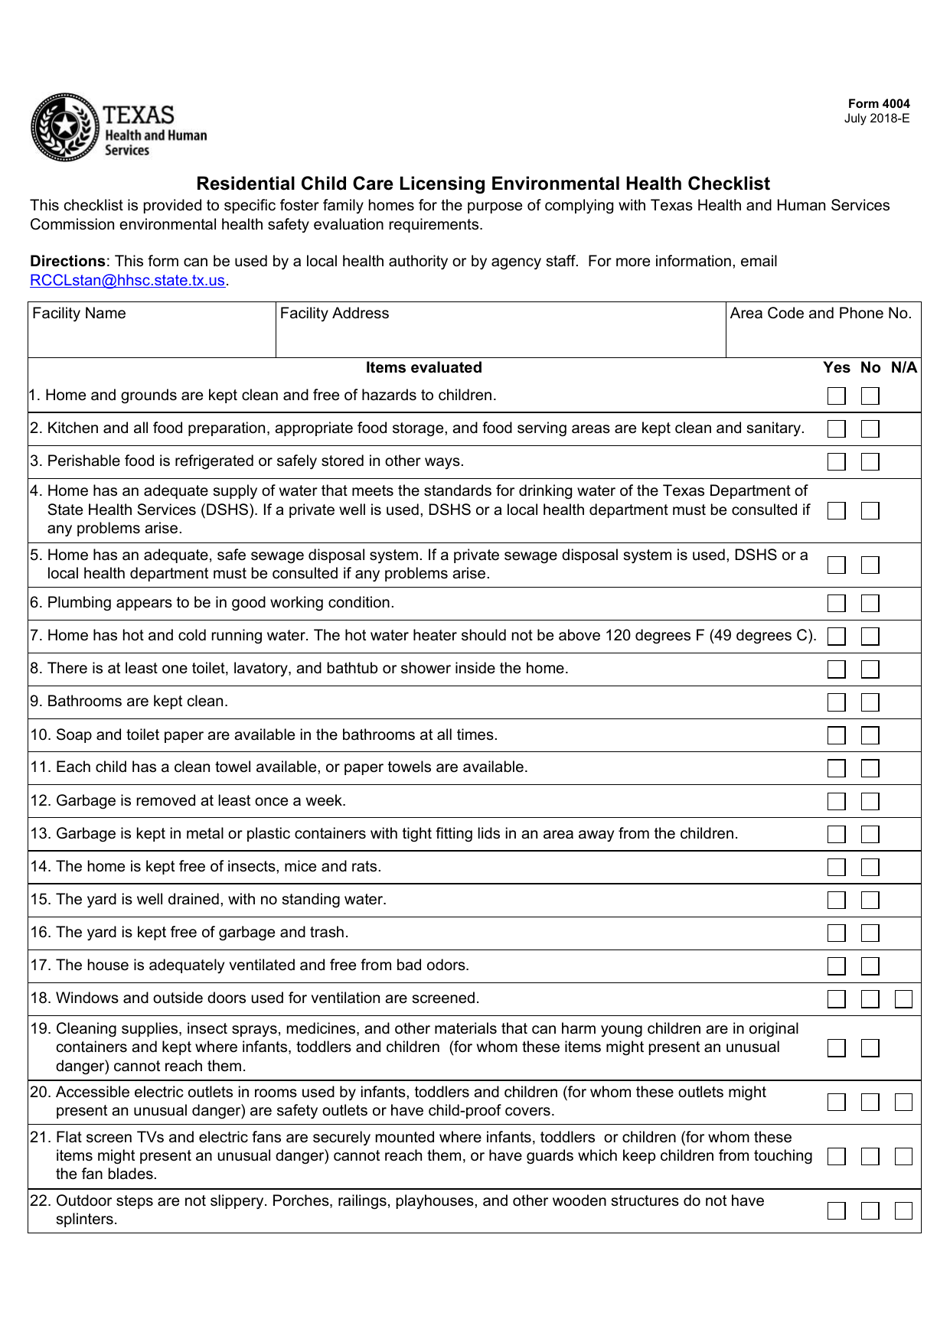 Form 4004 Residential Child Care Licensing Environmental Health Checklist - Texas, Page 1